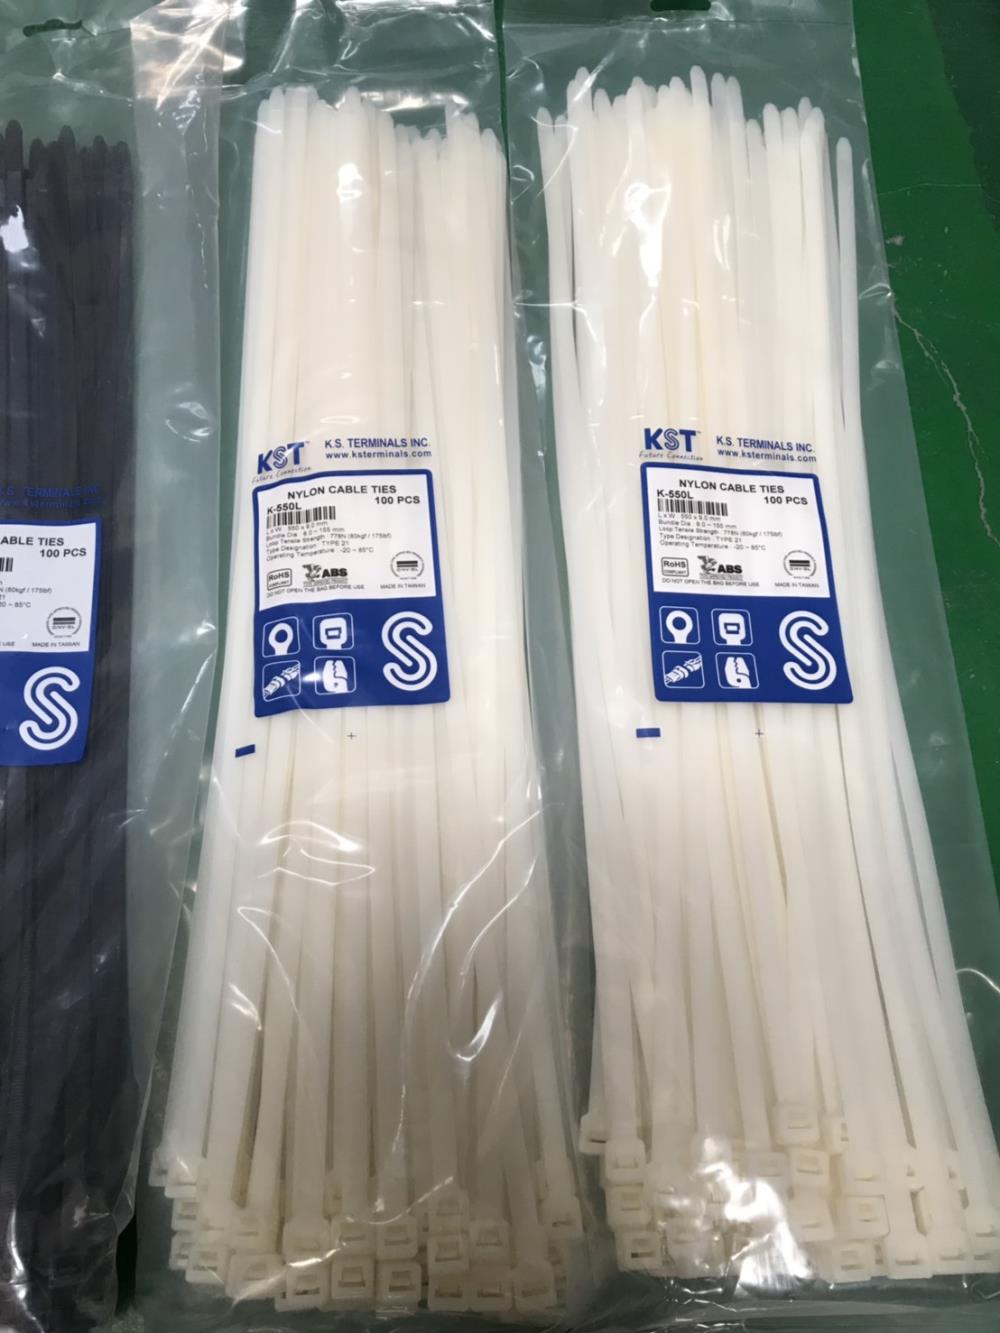 K-550L cable ties 22" ,CABLE TIES,KST,Materials Handling/Cable Ties